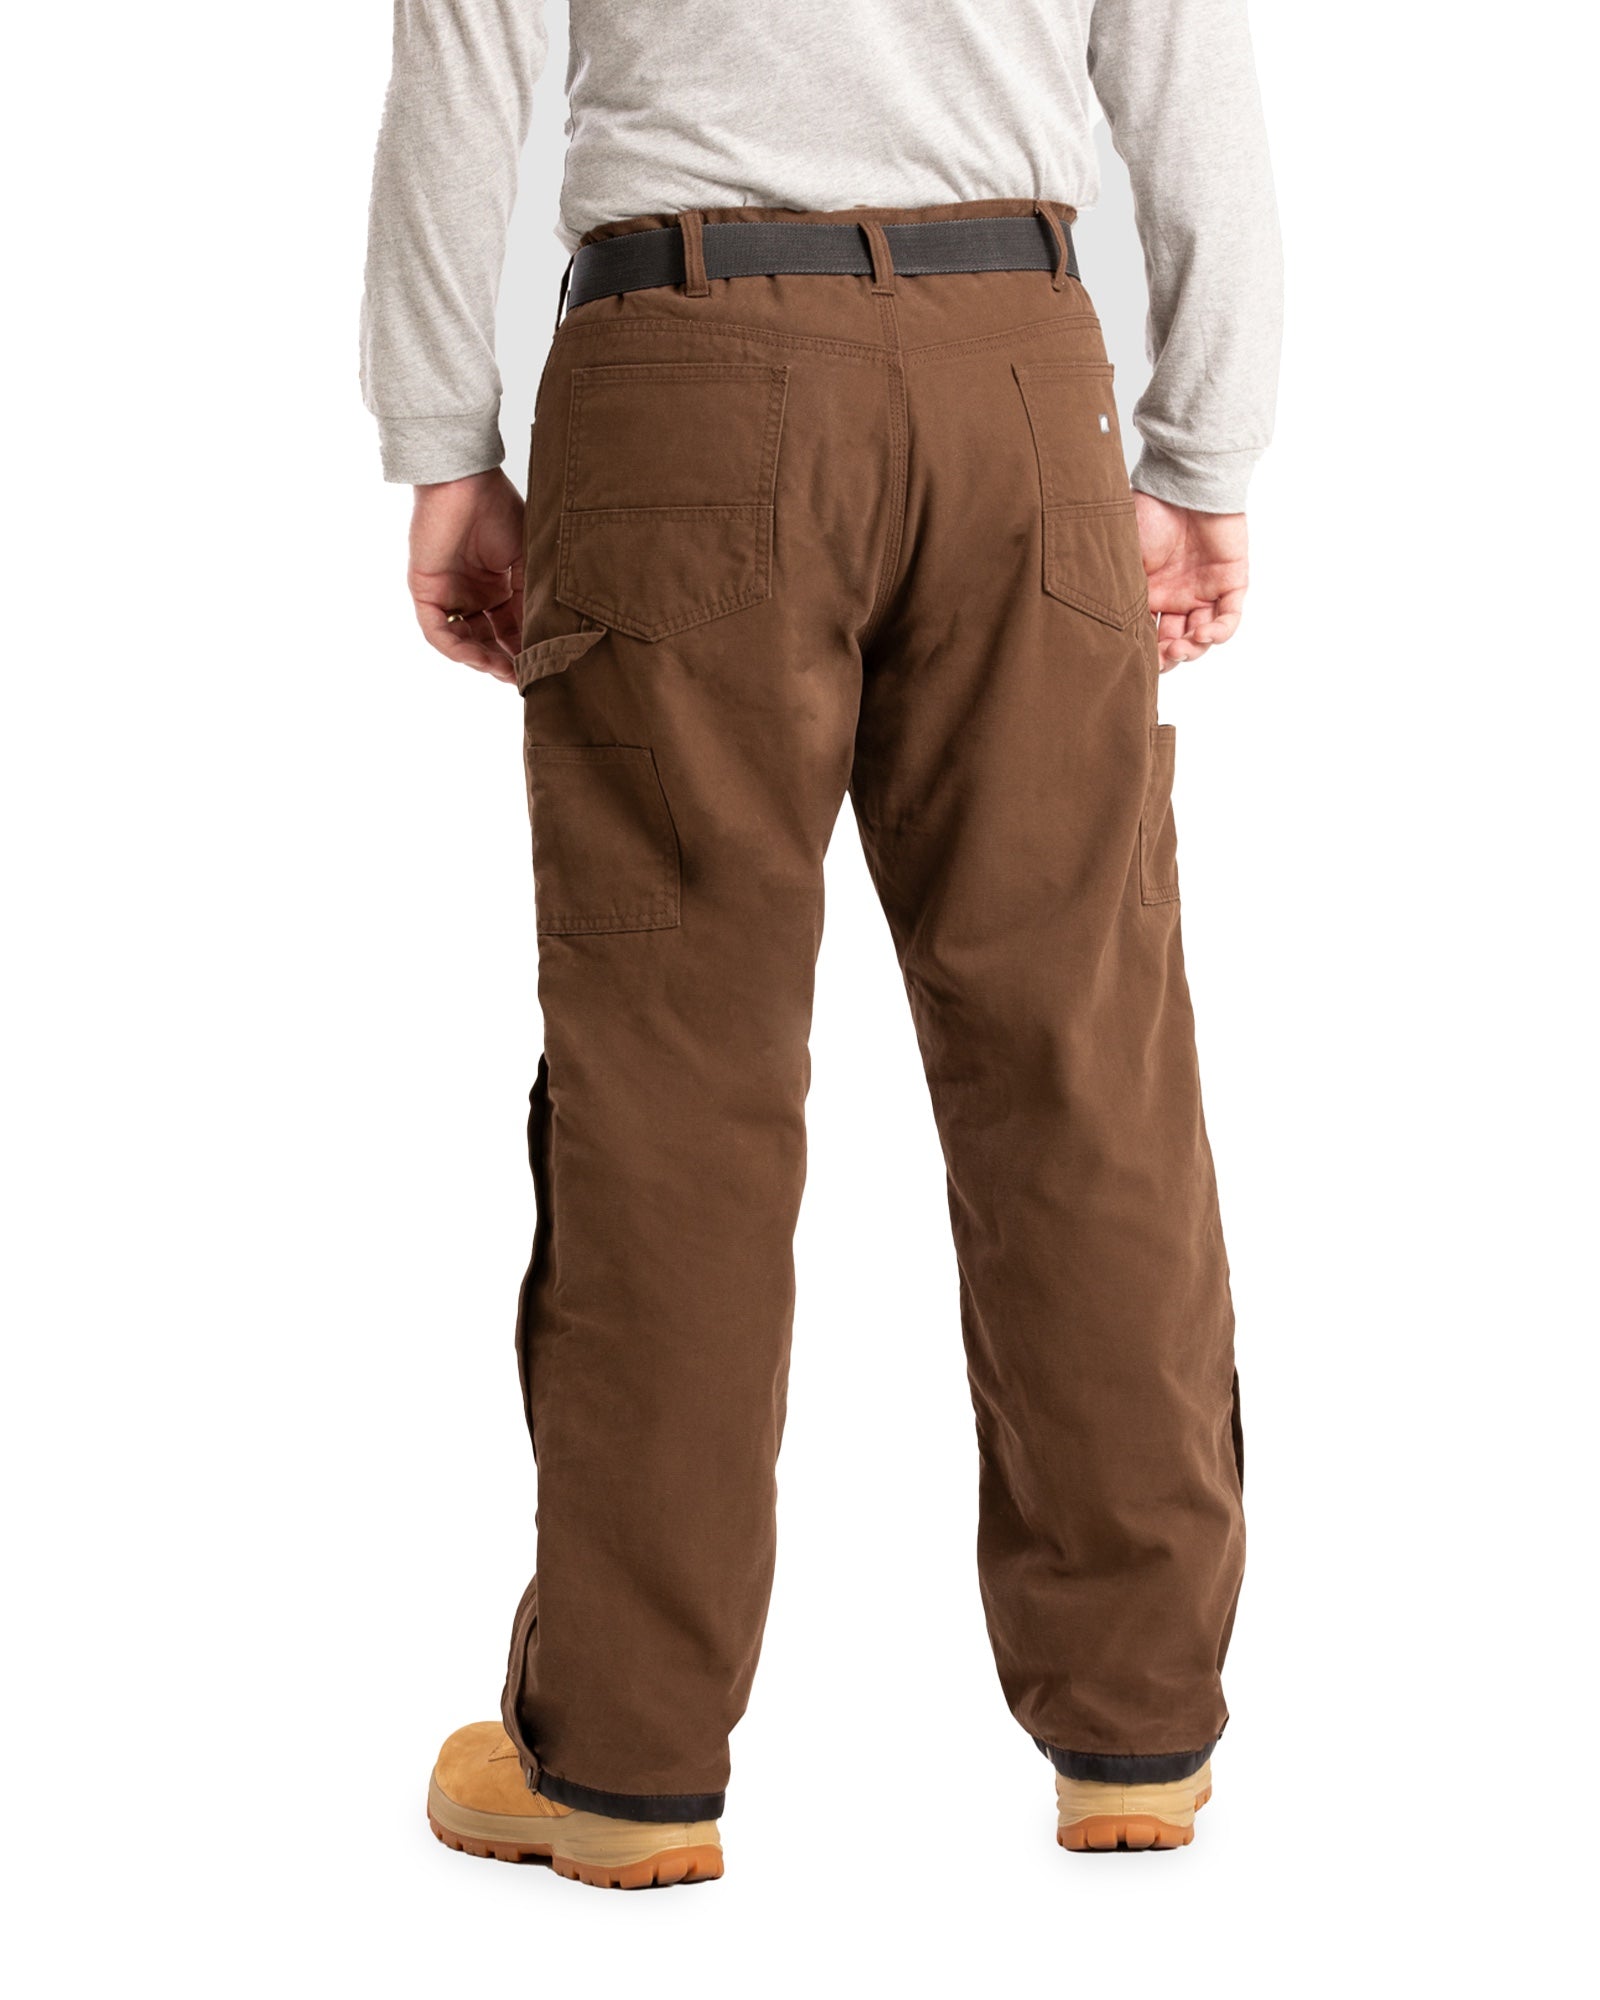 P966BB Highland Washed Duck Insulated Outer Pant